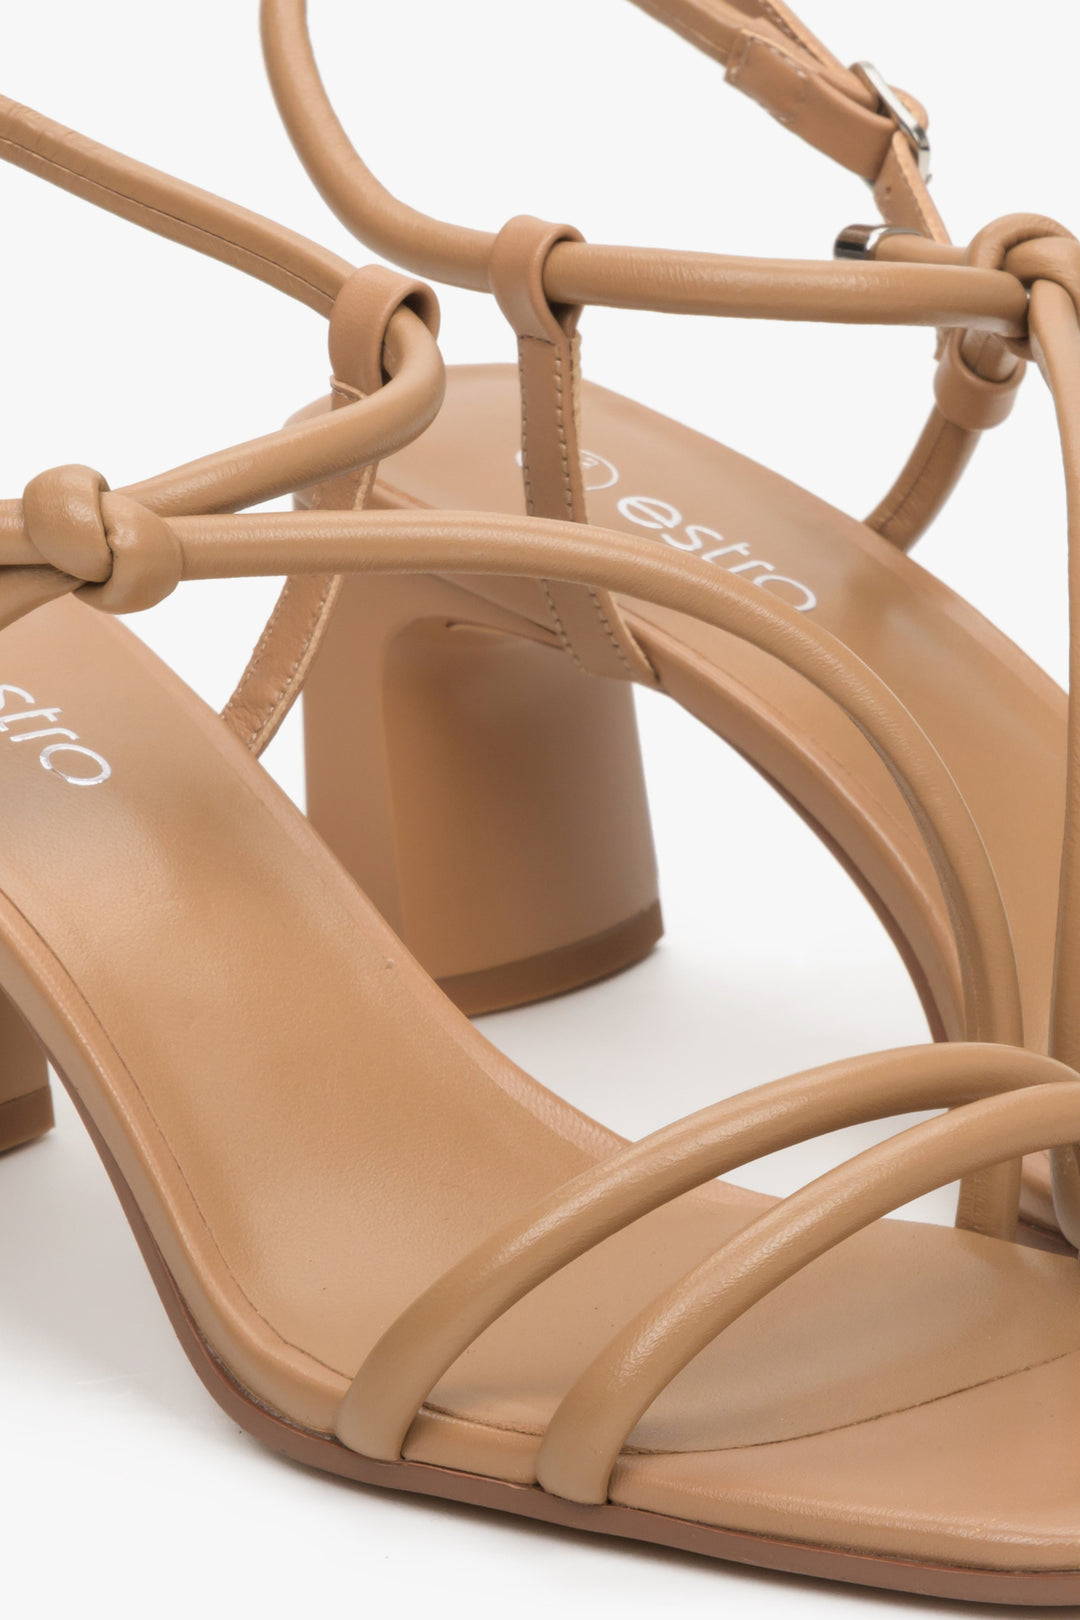 Leather strappy light brown sandals of Estro brand - a close-up on details.